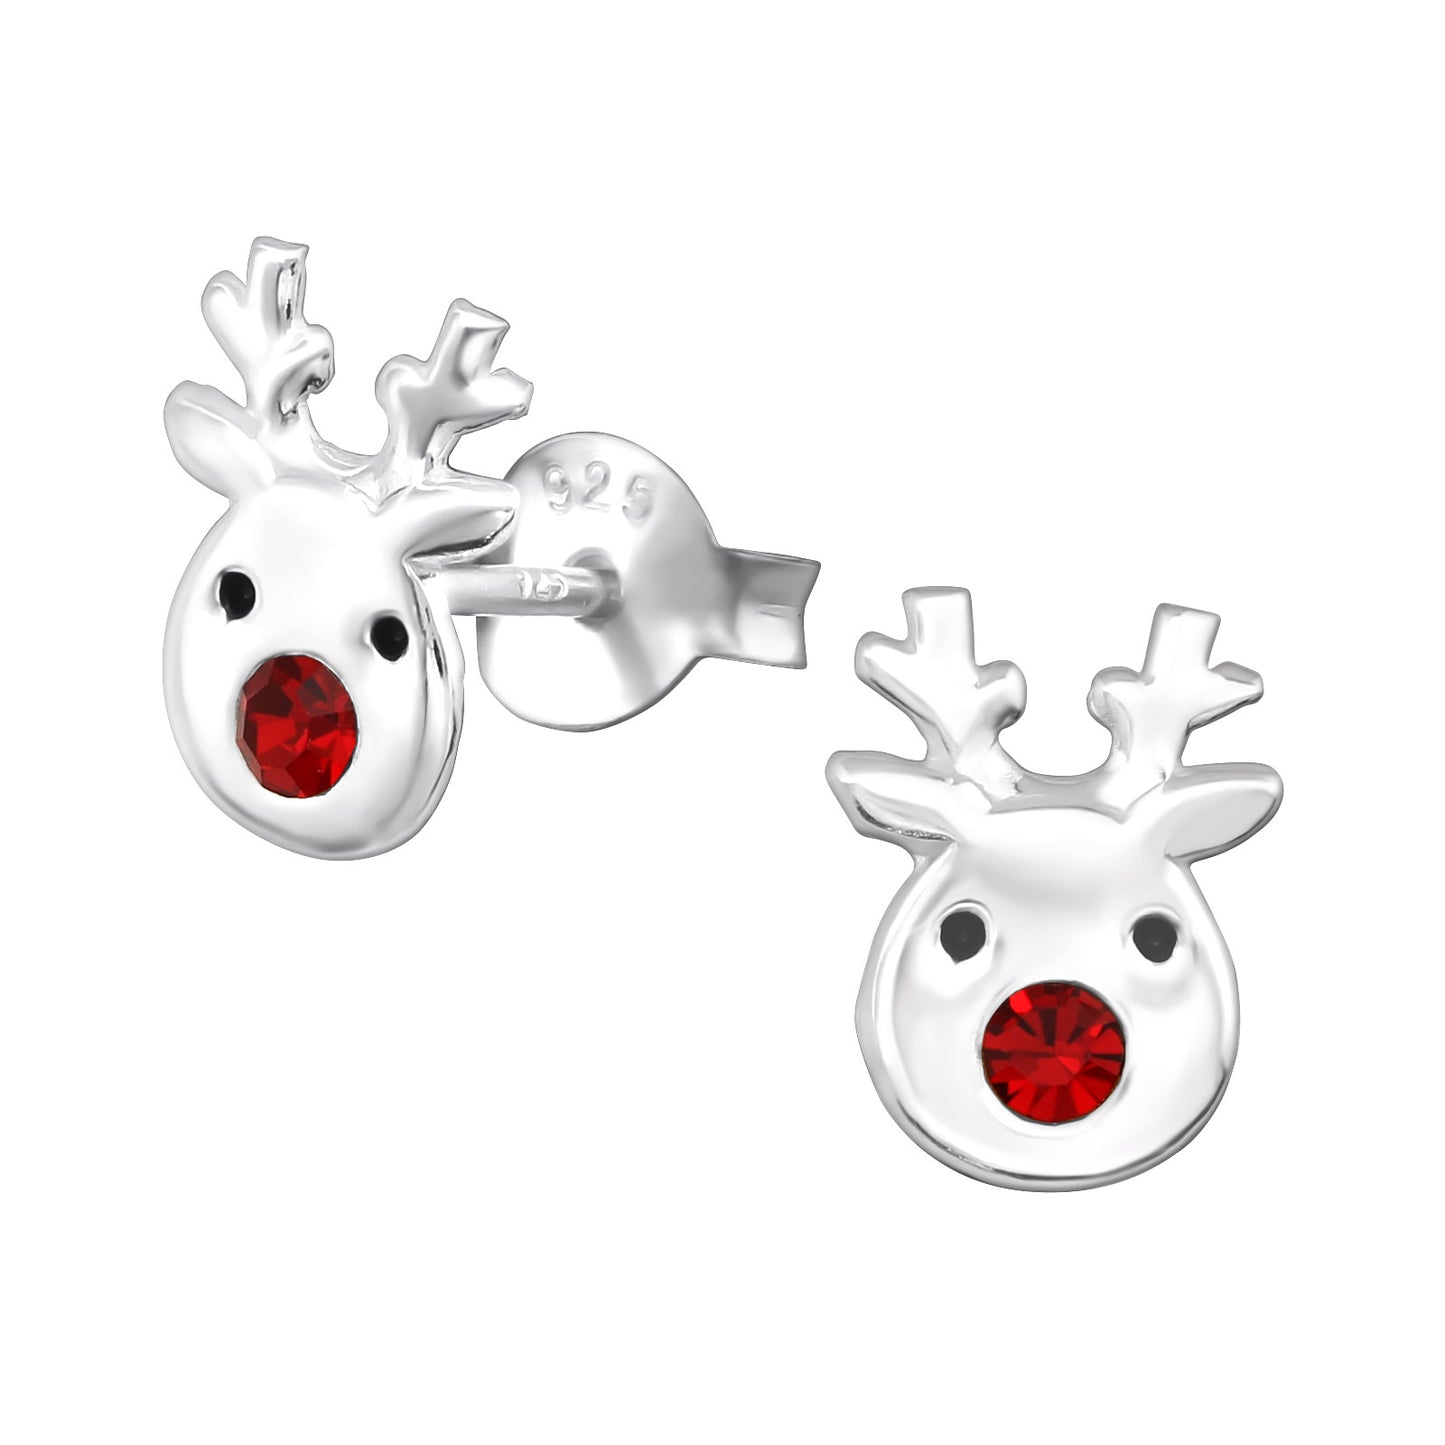 Rudolph the red nose reindeer had a crystal for his nose! 